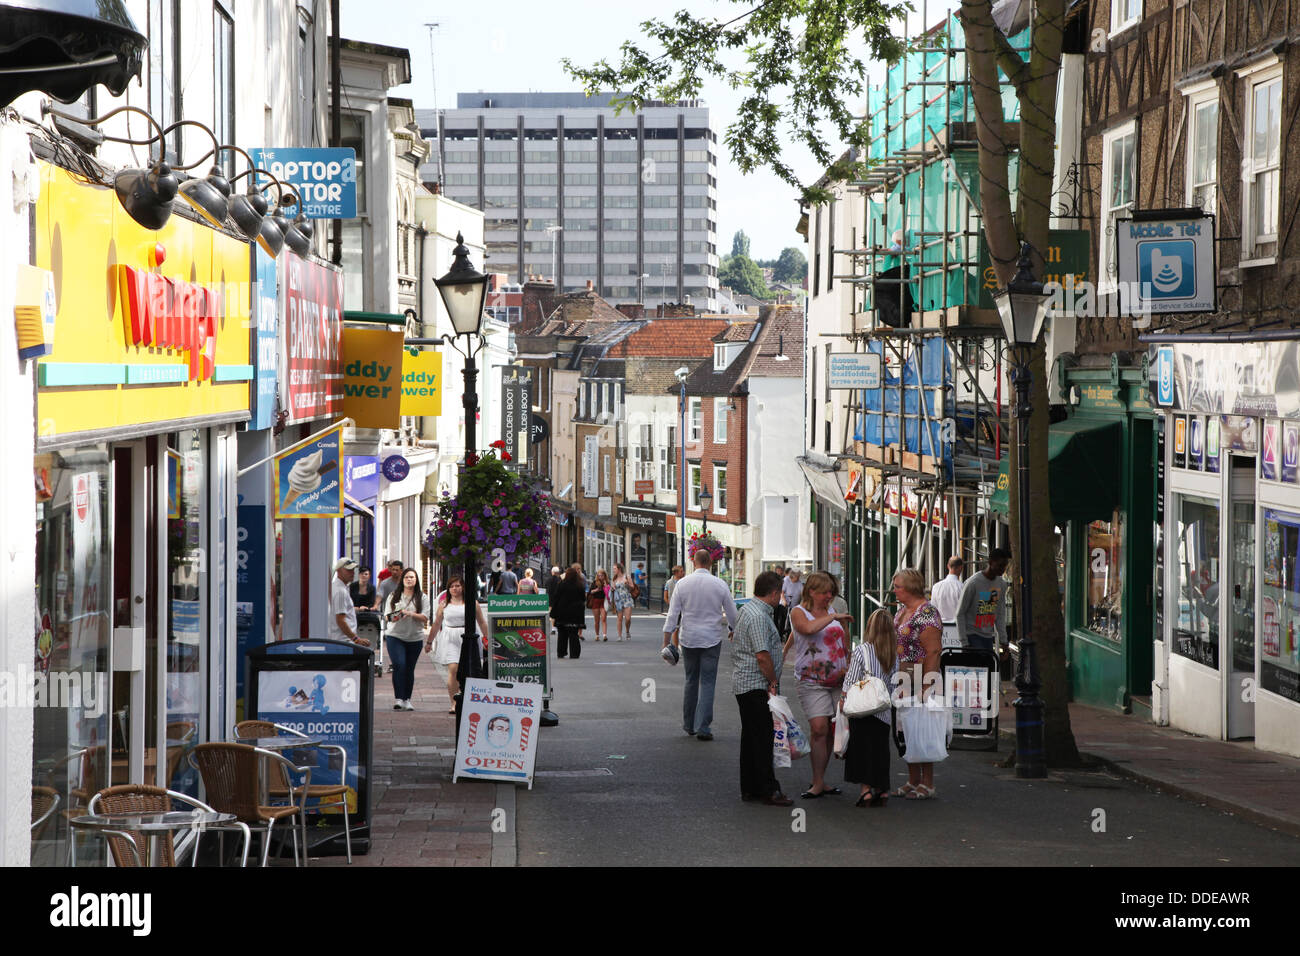 Maidstone Town Centre. A pedestrianized street lends itself to conversations between passing people. Stock Photo